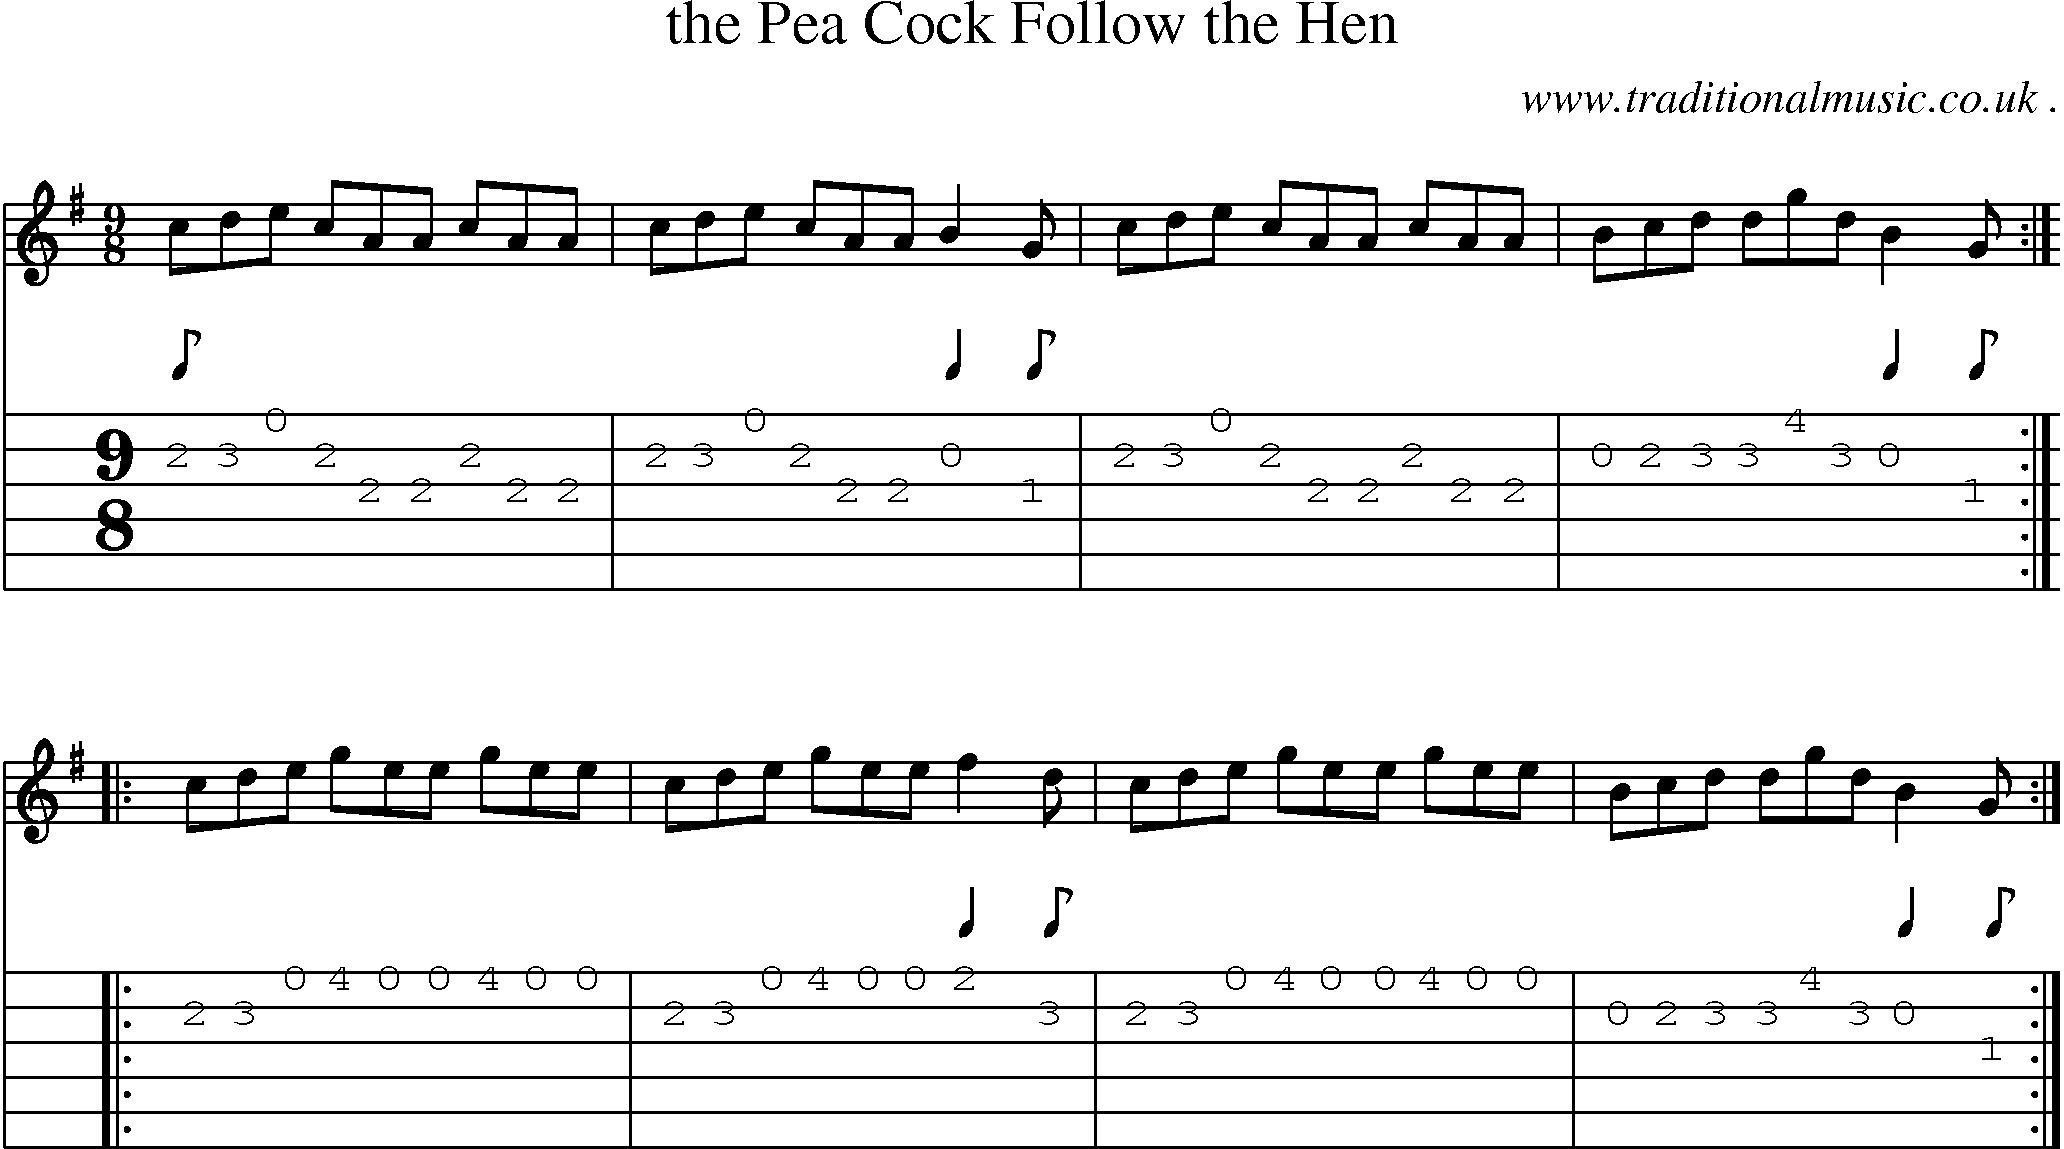 Sheet-Music and Guitar Tabs for The Pea Cock Follow The Hen